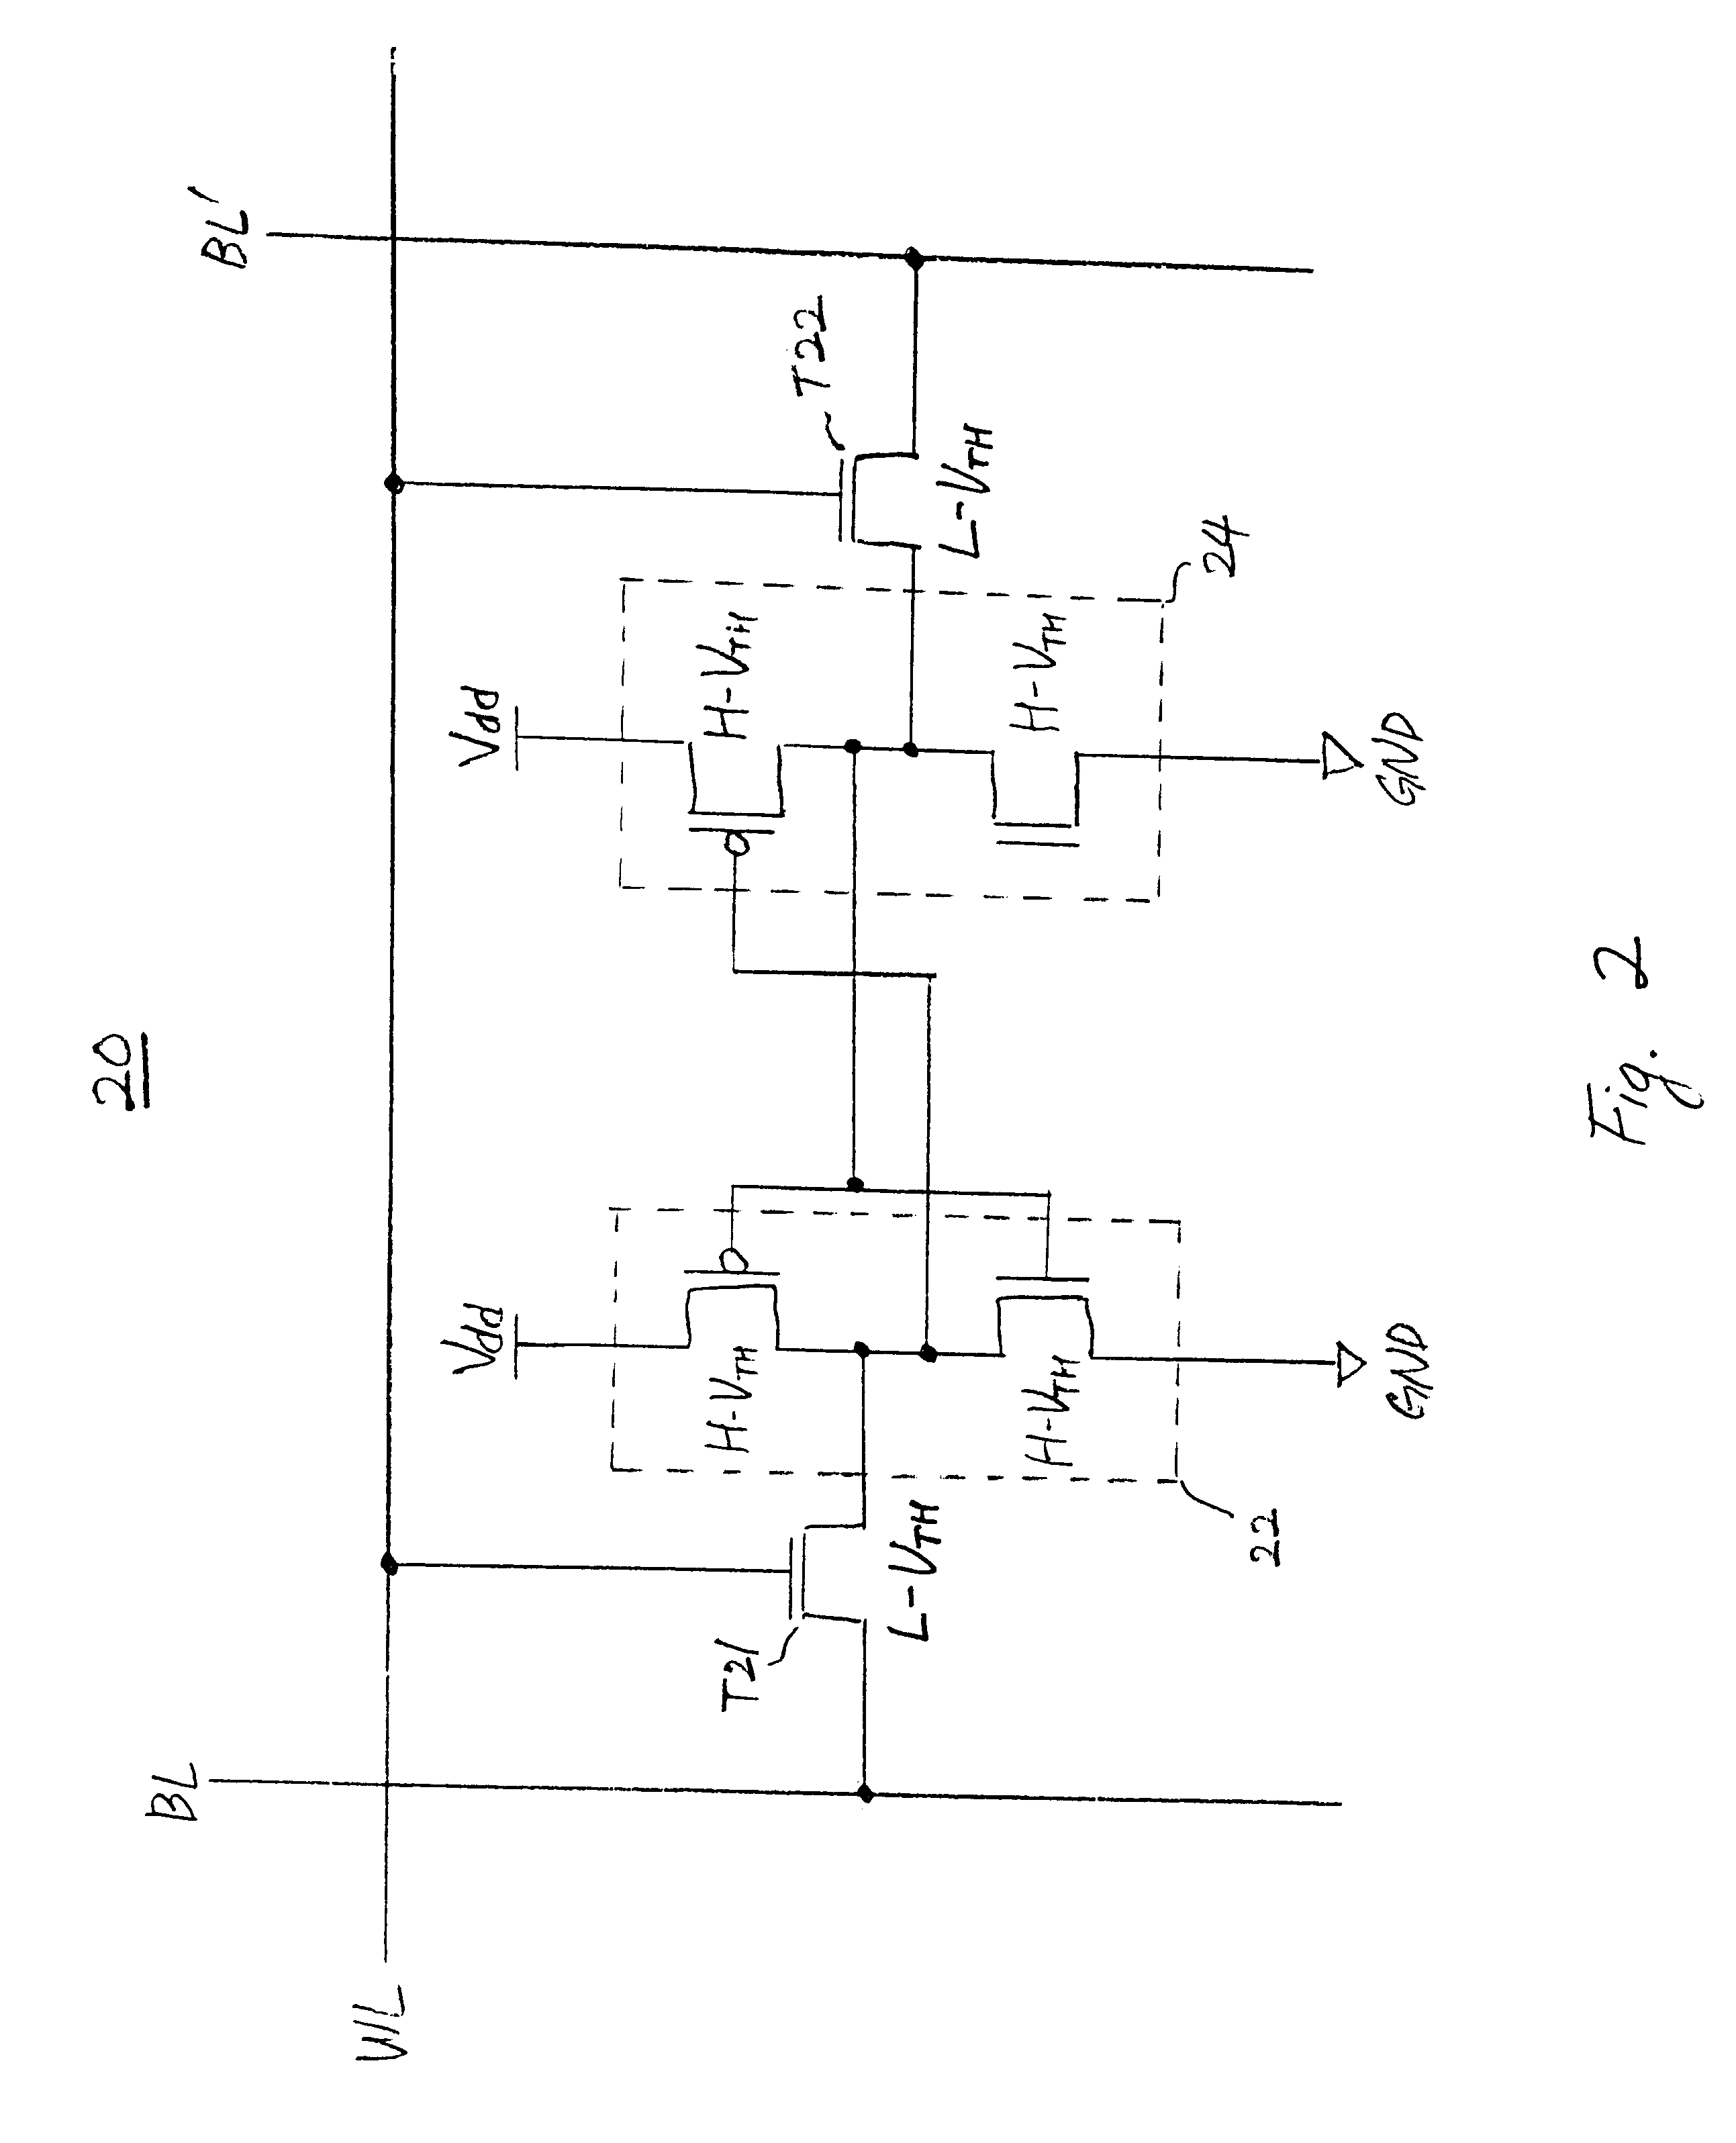 High performance semiconductor memory device with low power consumption